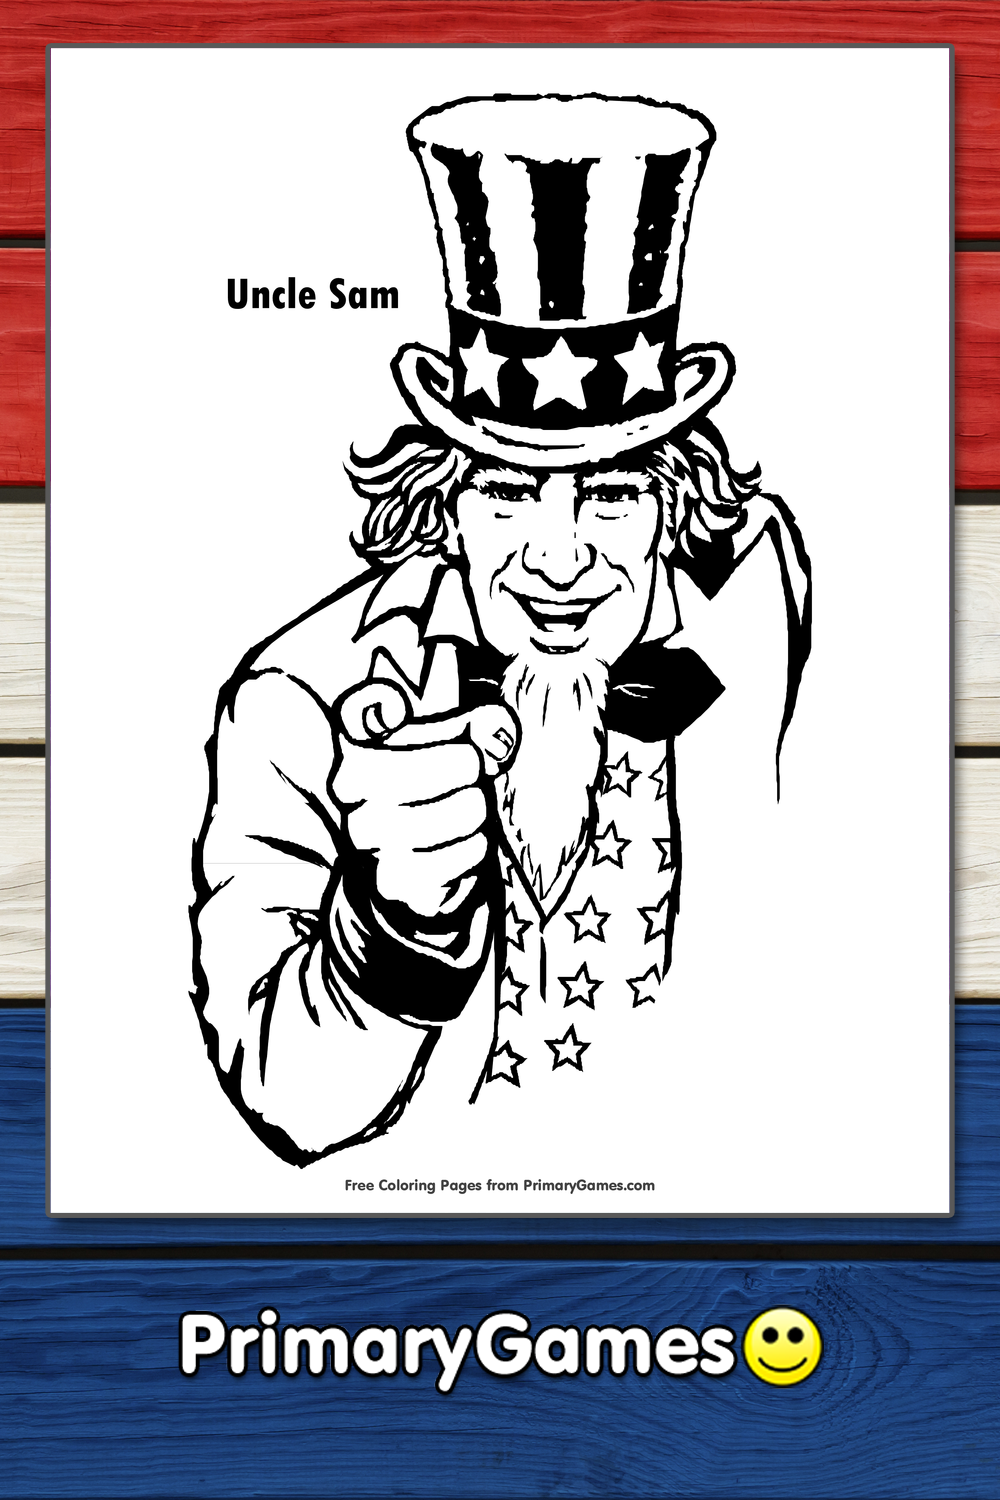 Uncle sam coloring page â free printable pdf from